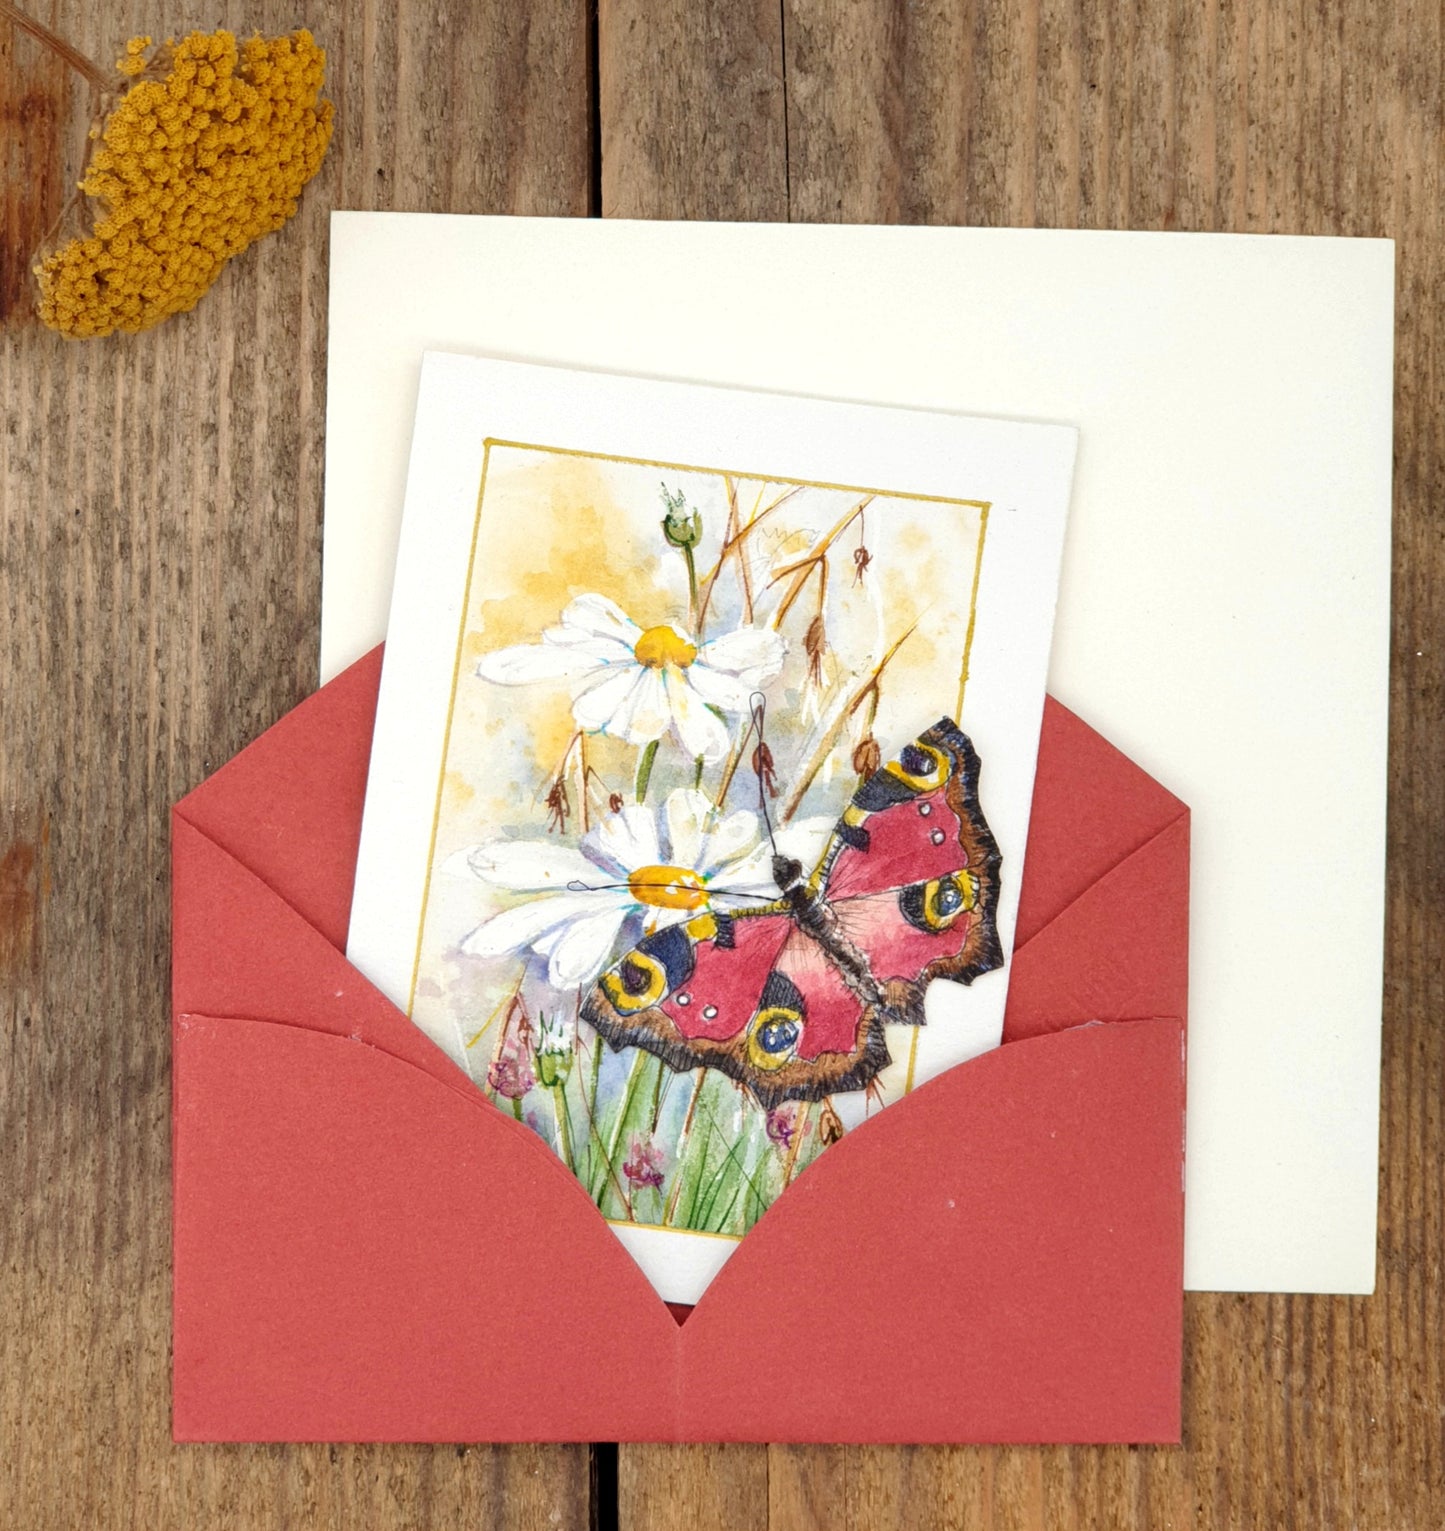 Original Watercolour Miniature - Butterfly with Daisy Meadow